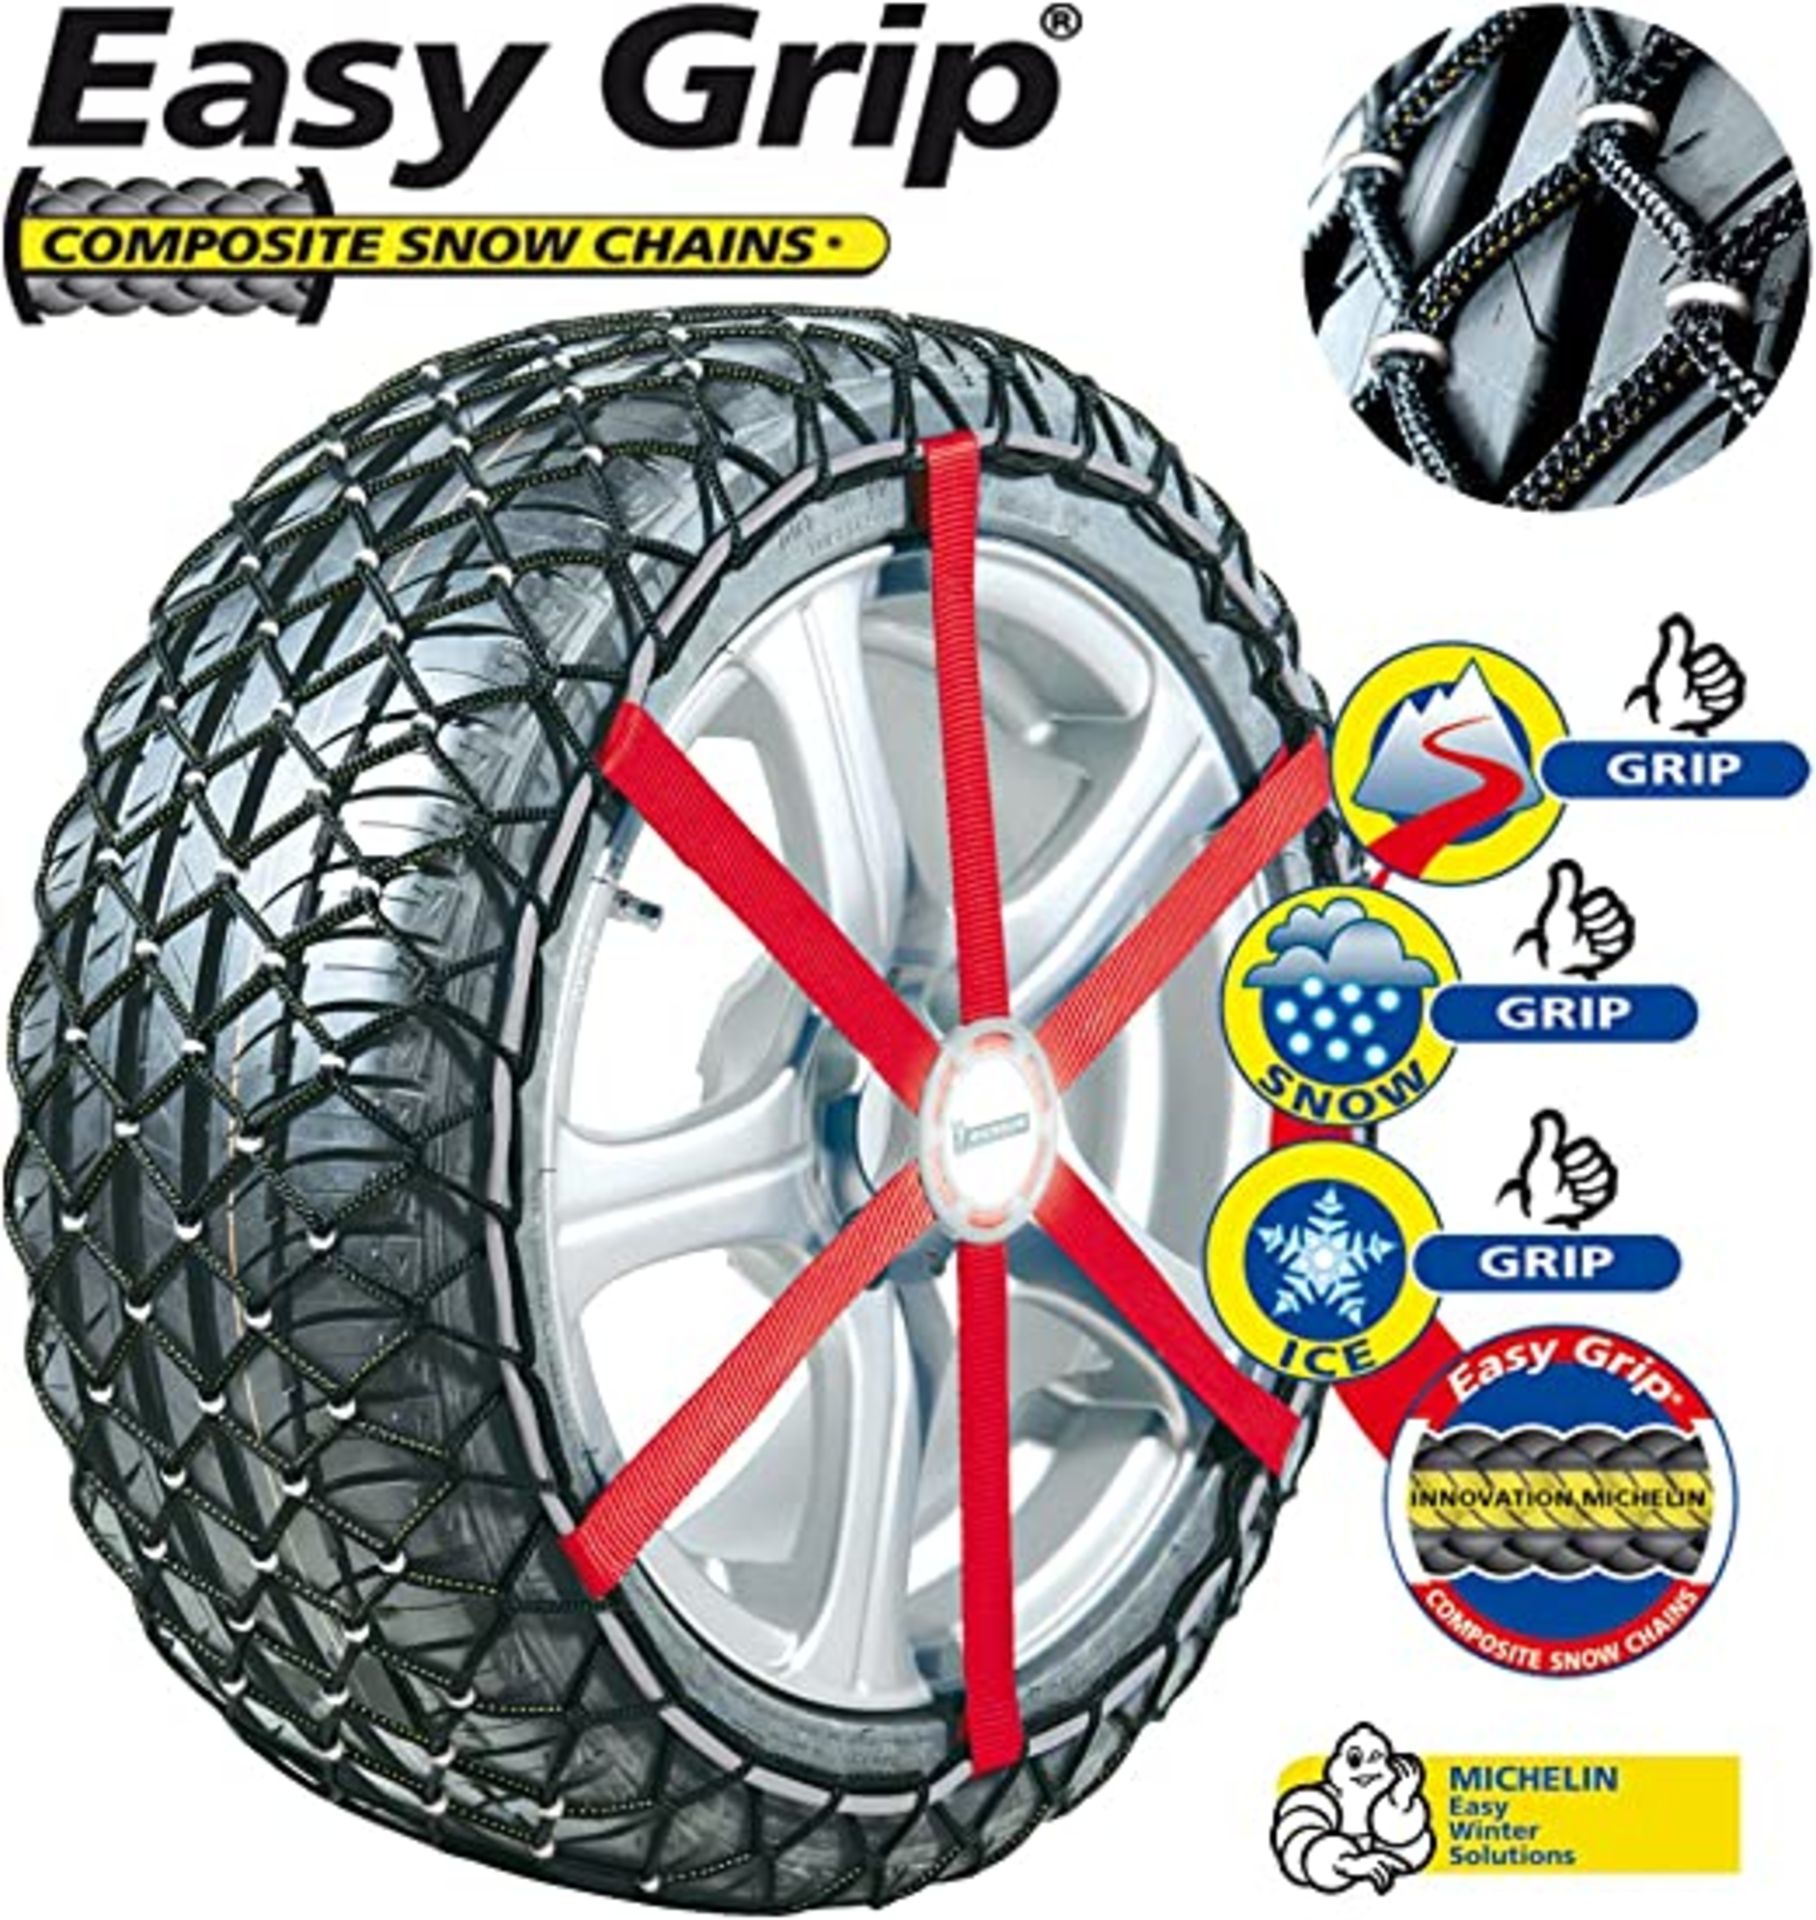 5 X NEW PACKAGED SETS OF MICHELIN 7901 Easy Grip Snow Chains H12. RRP £82.95 EACH. Michelin 7901 - Image 3 of 4